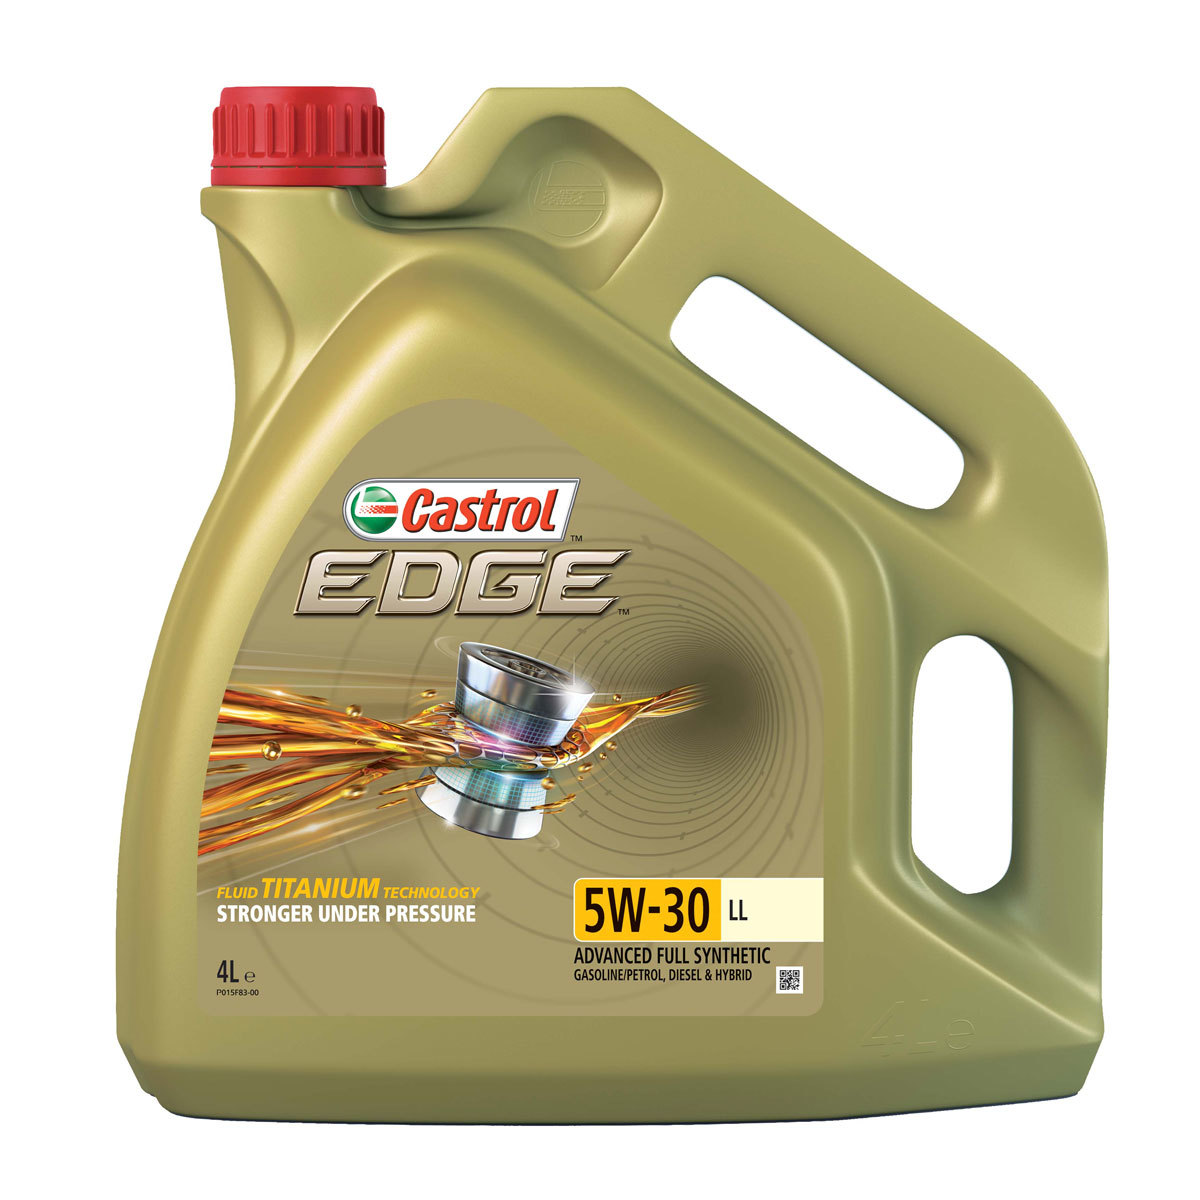 Cut out image of Castrol Edge Oil container against a hite background